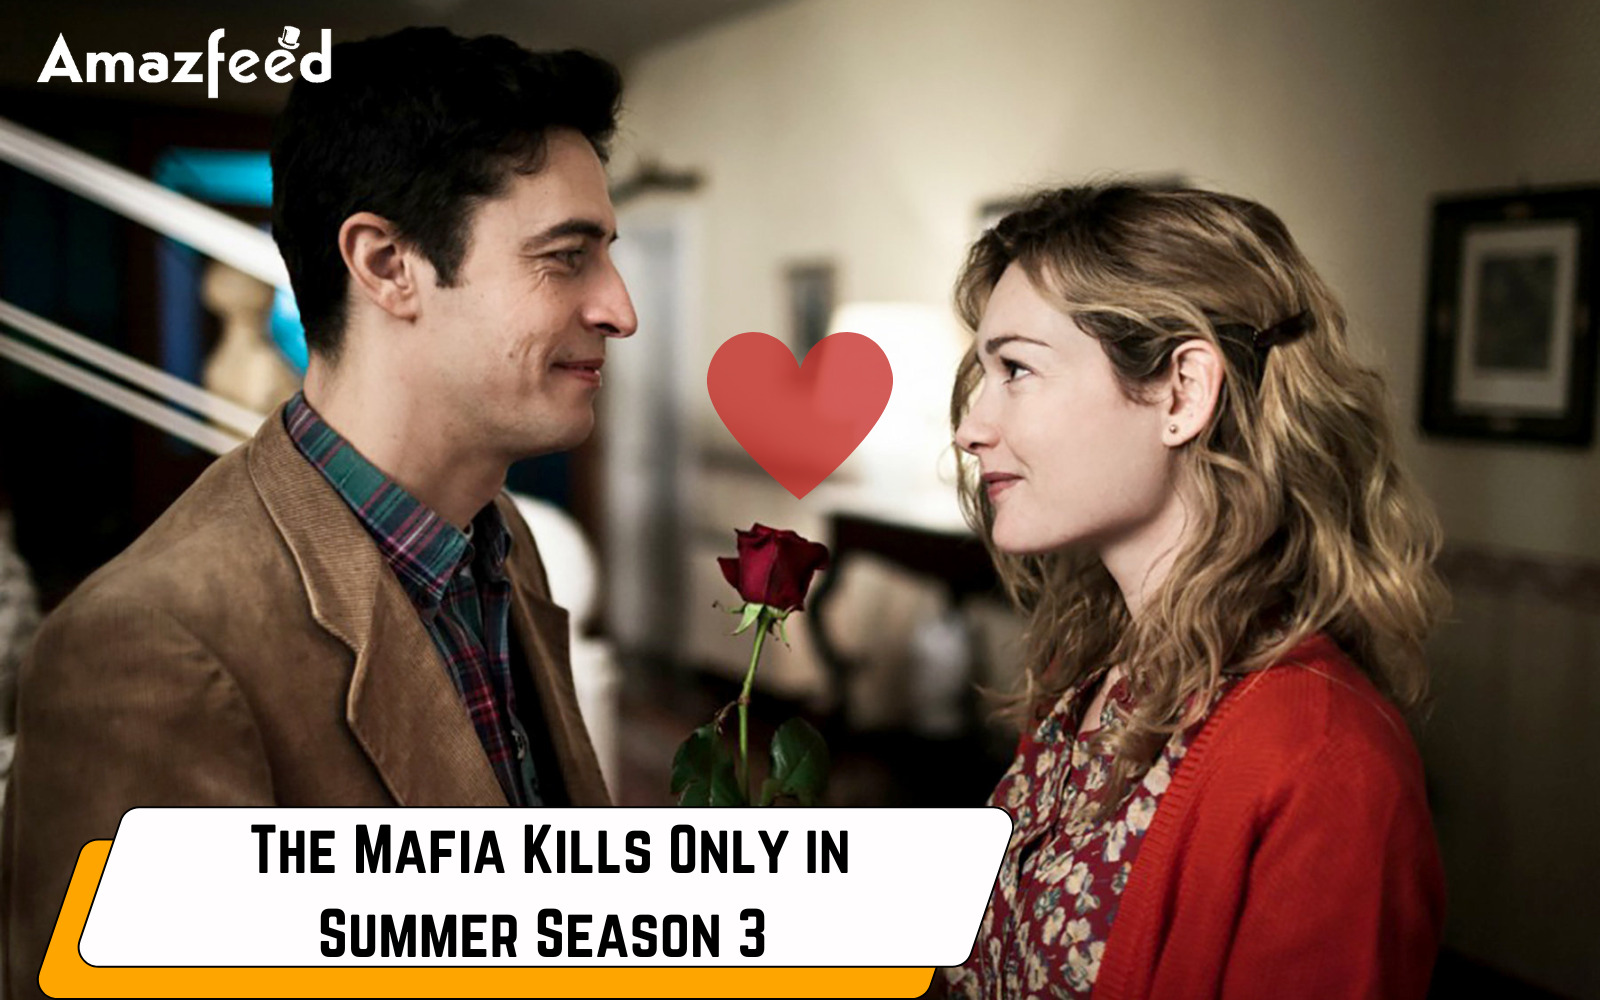 Who Will Be Part Of The Mafia Kills Only in Summer Season 3 (cast and character)